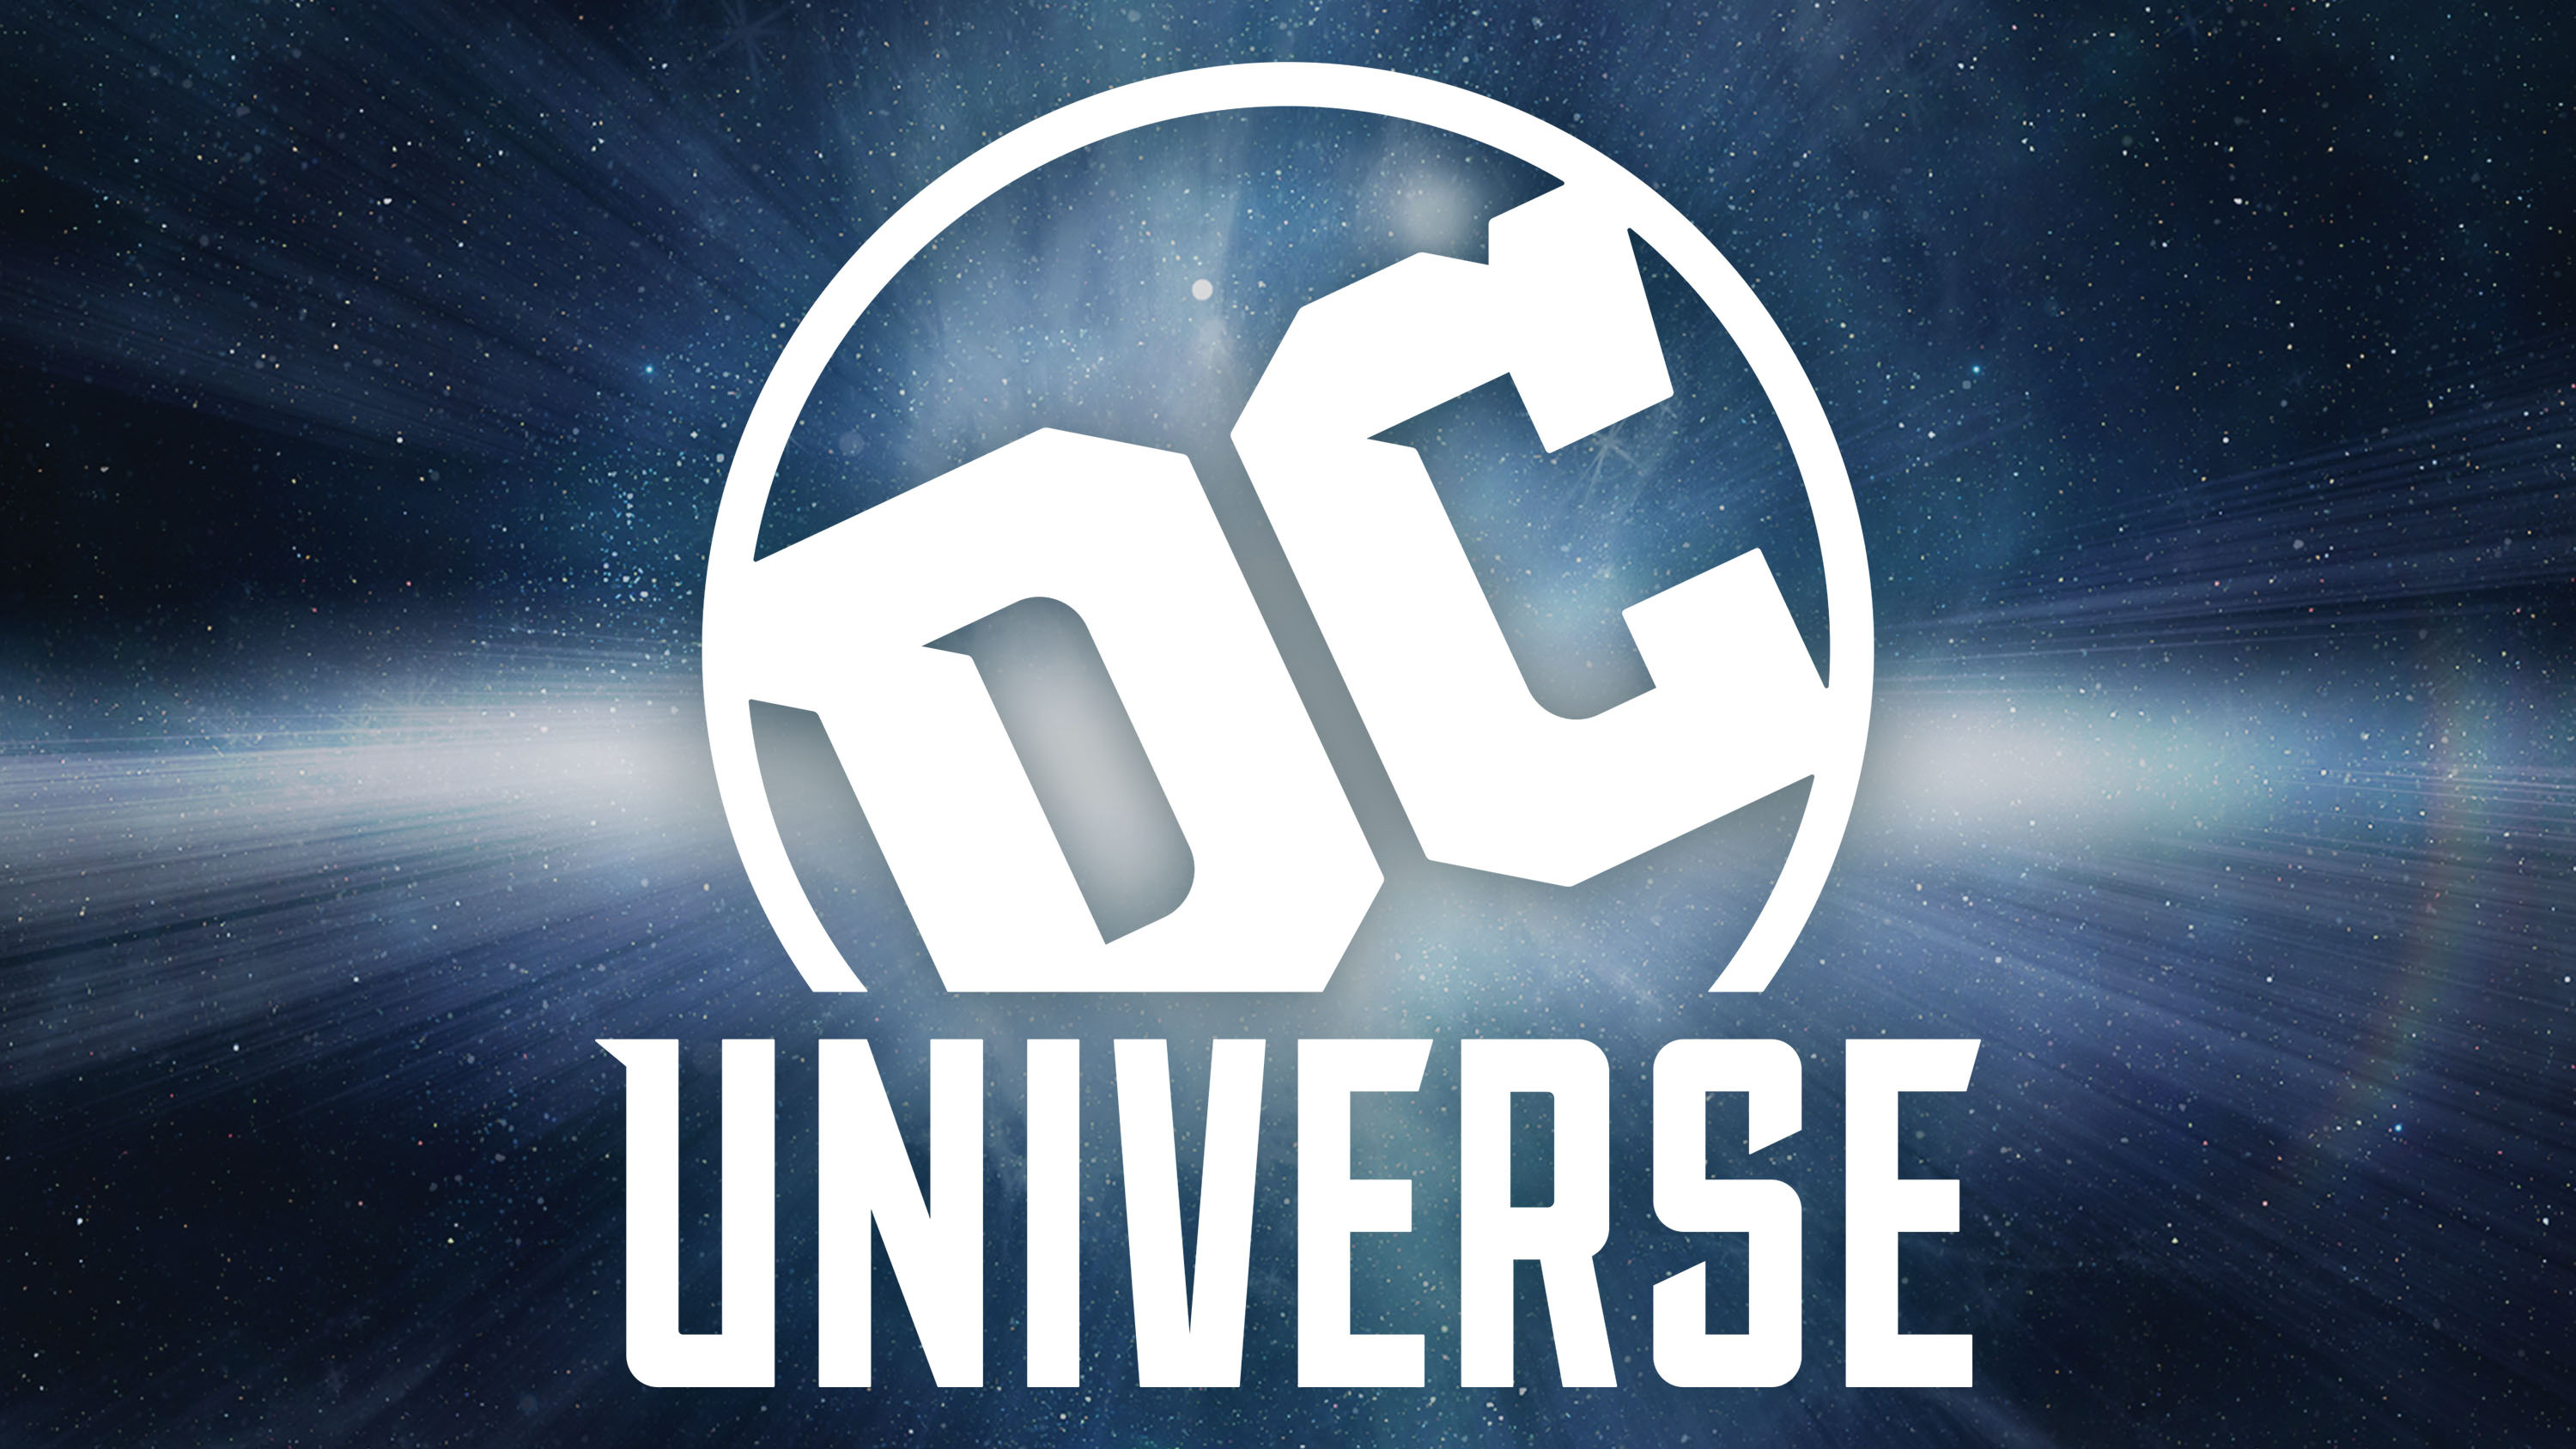 dc-universe-new-logo-hd-logo-4k-wallpapers-images-backgrounds